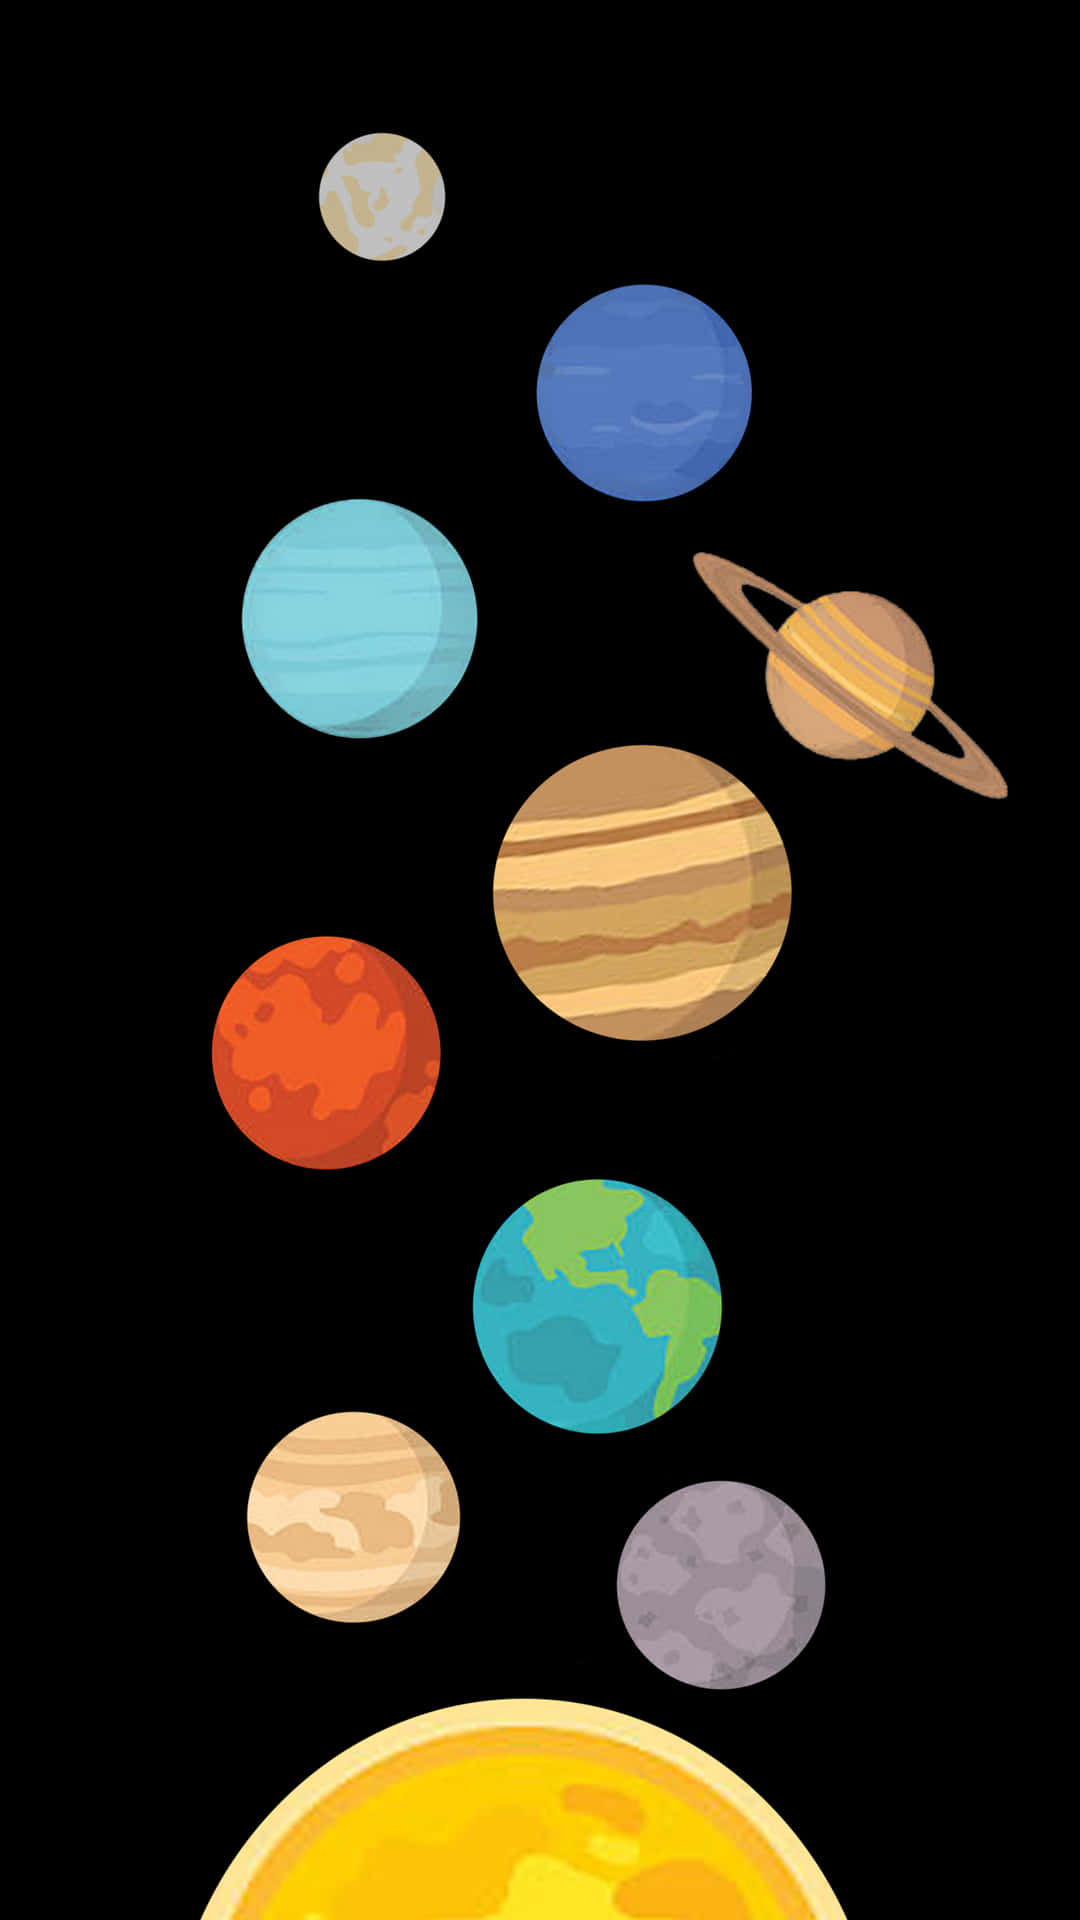 A Cartoon Image Of The Planets Flying Around The Earth Wallpaper